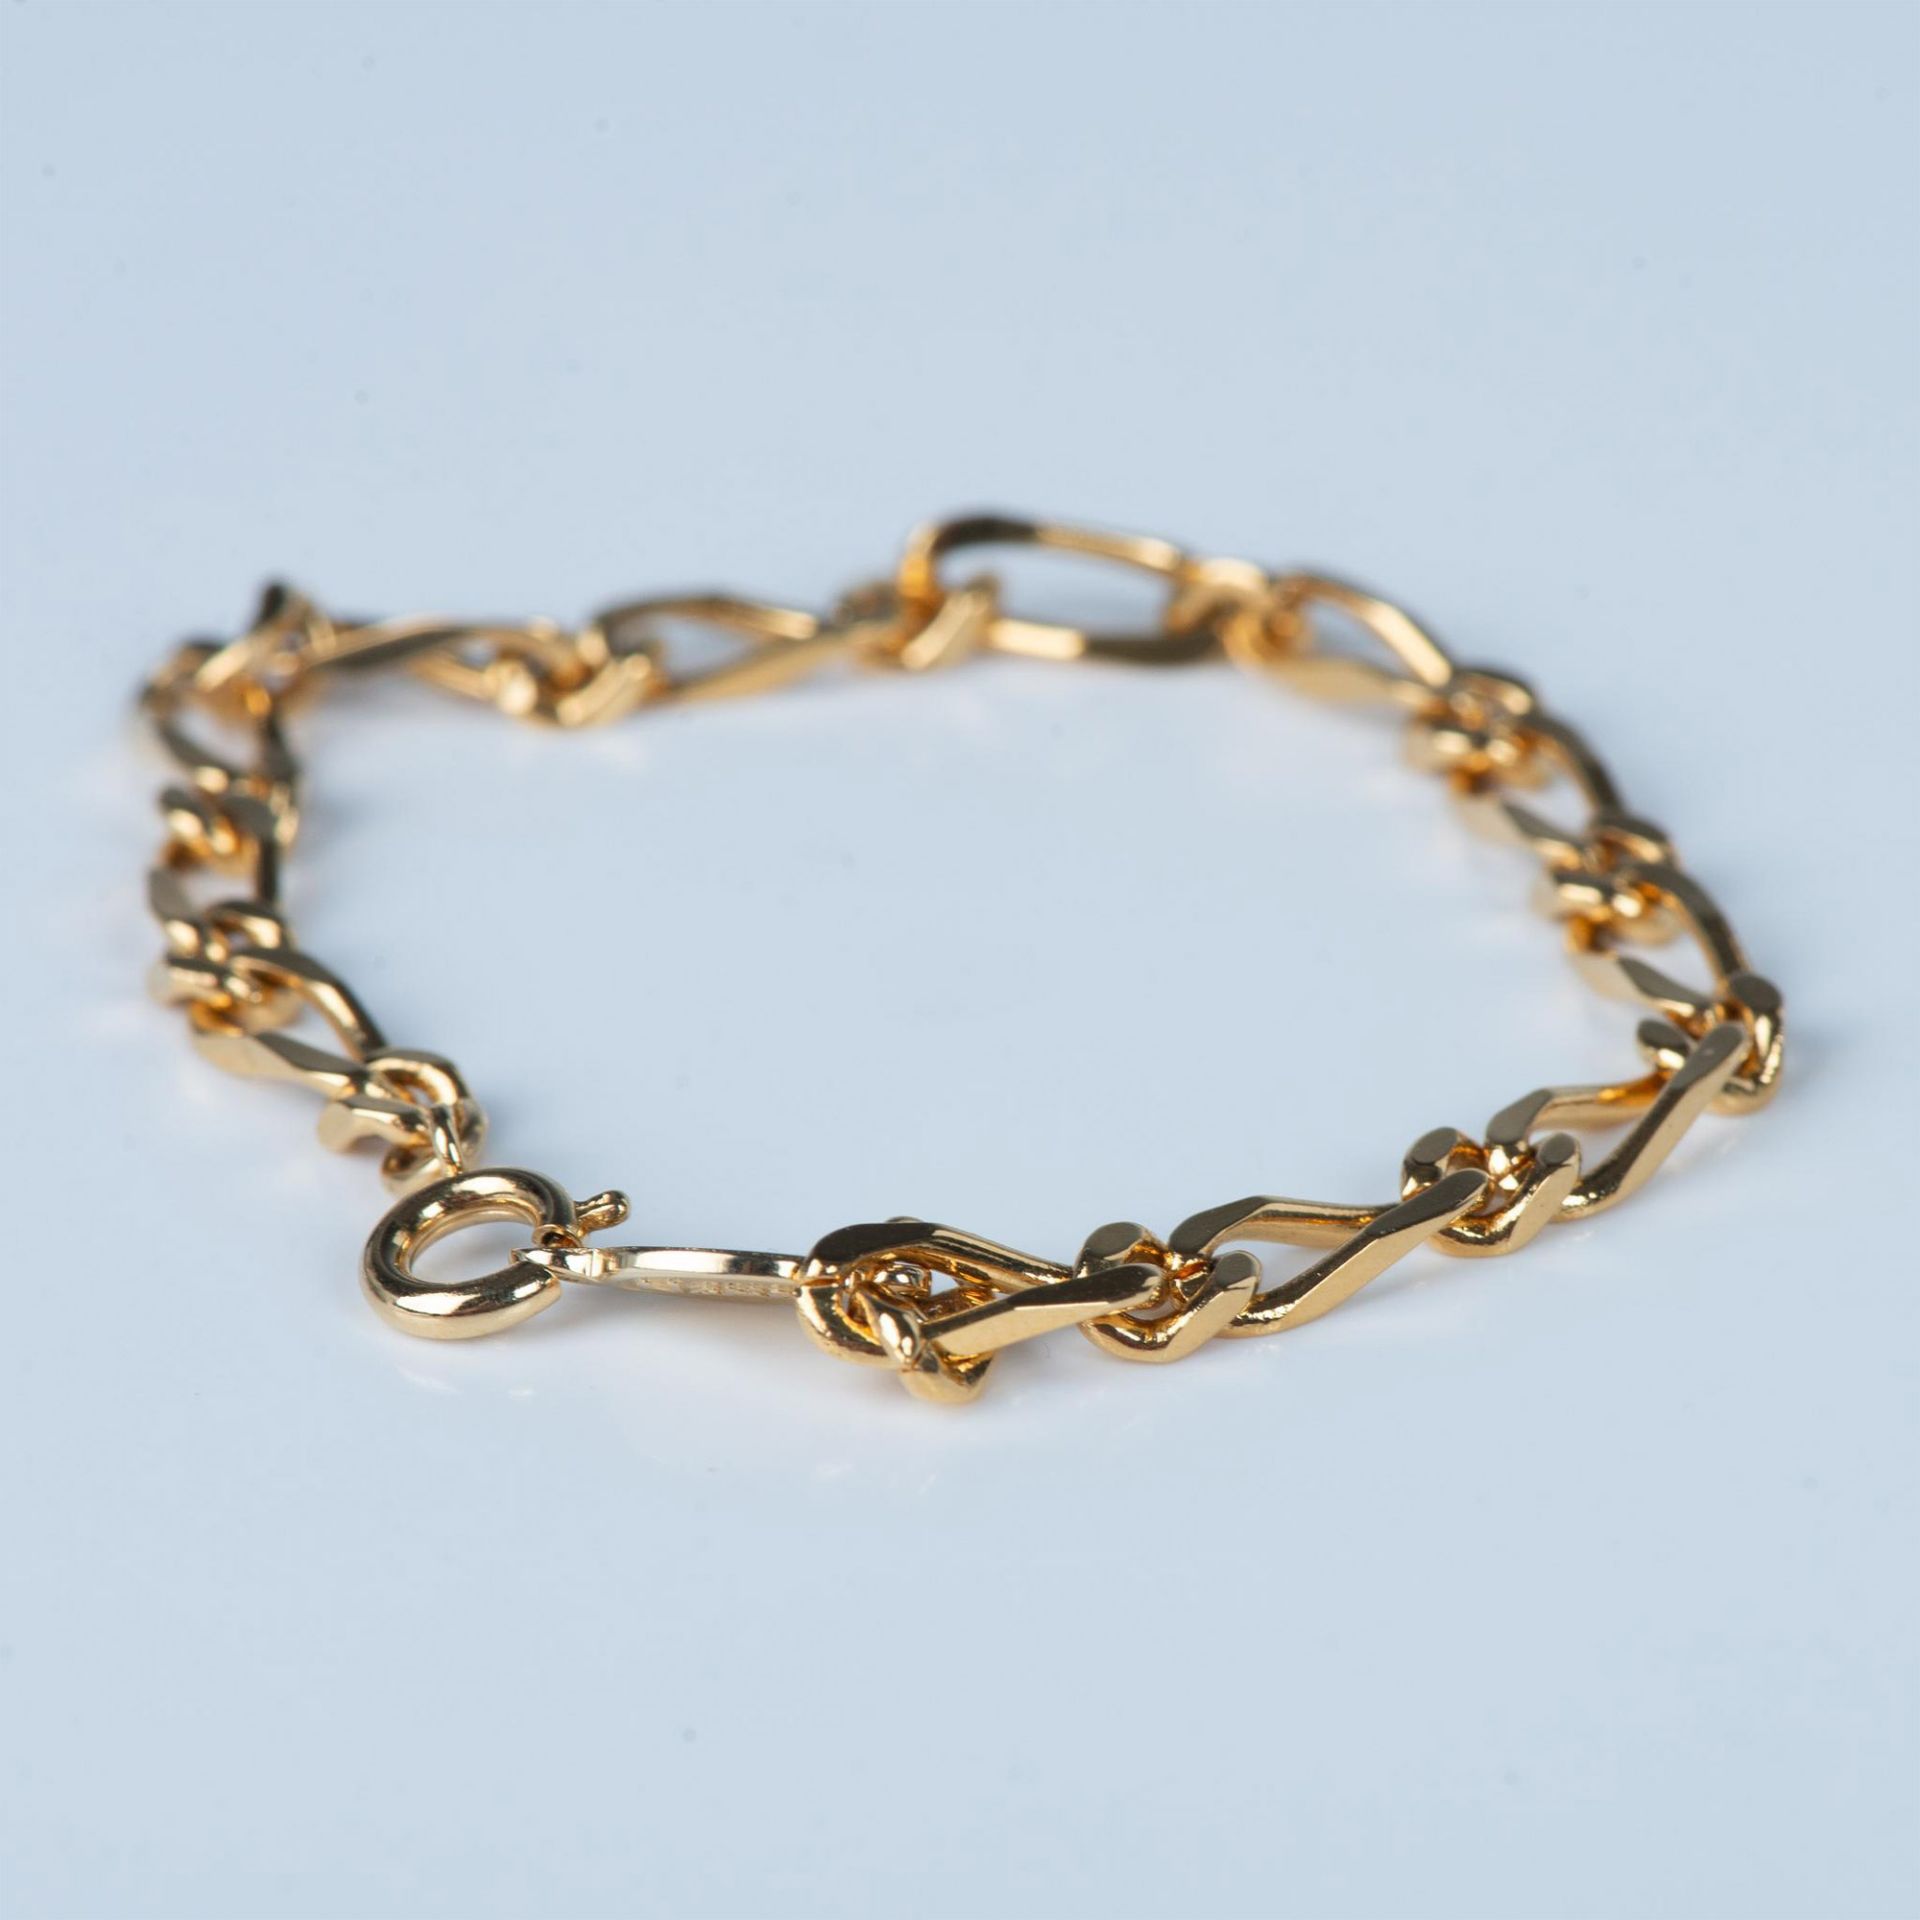 4pc Gold Tone Bracelets and Brooches - Image 6 of 7